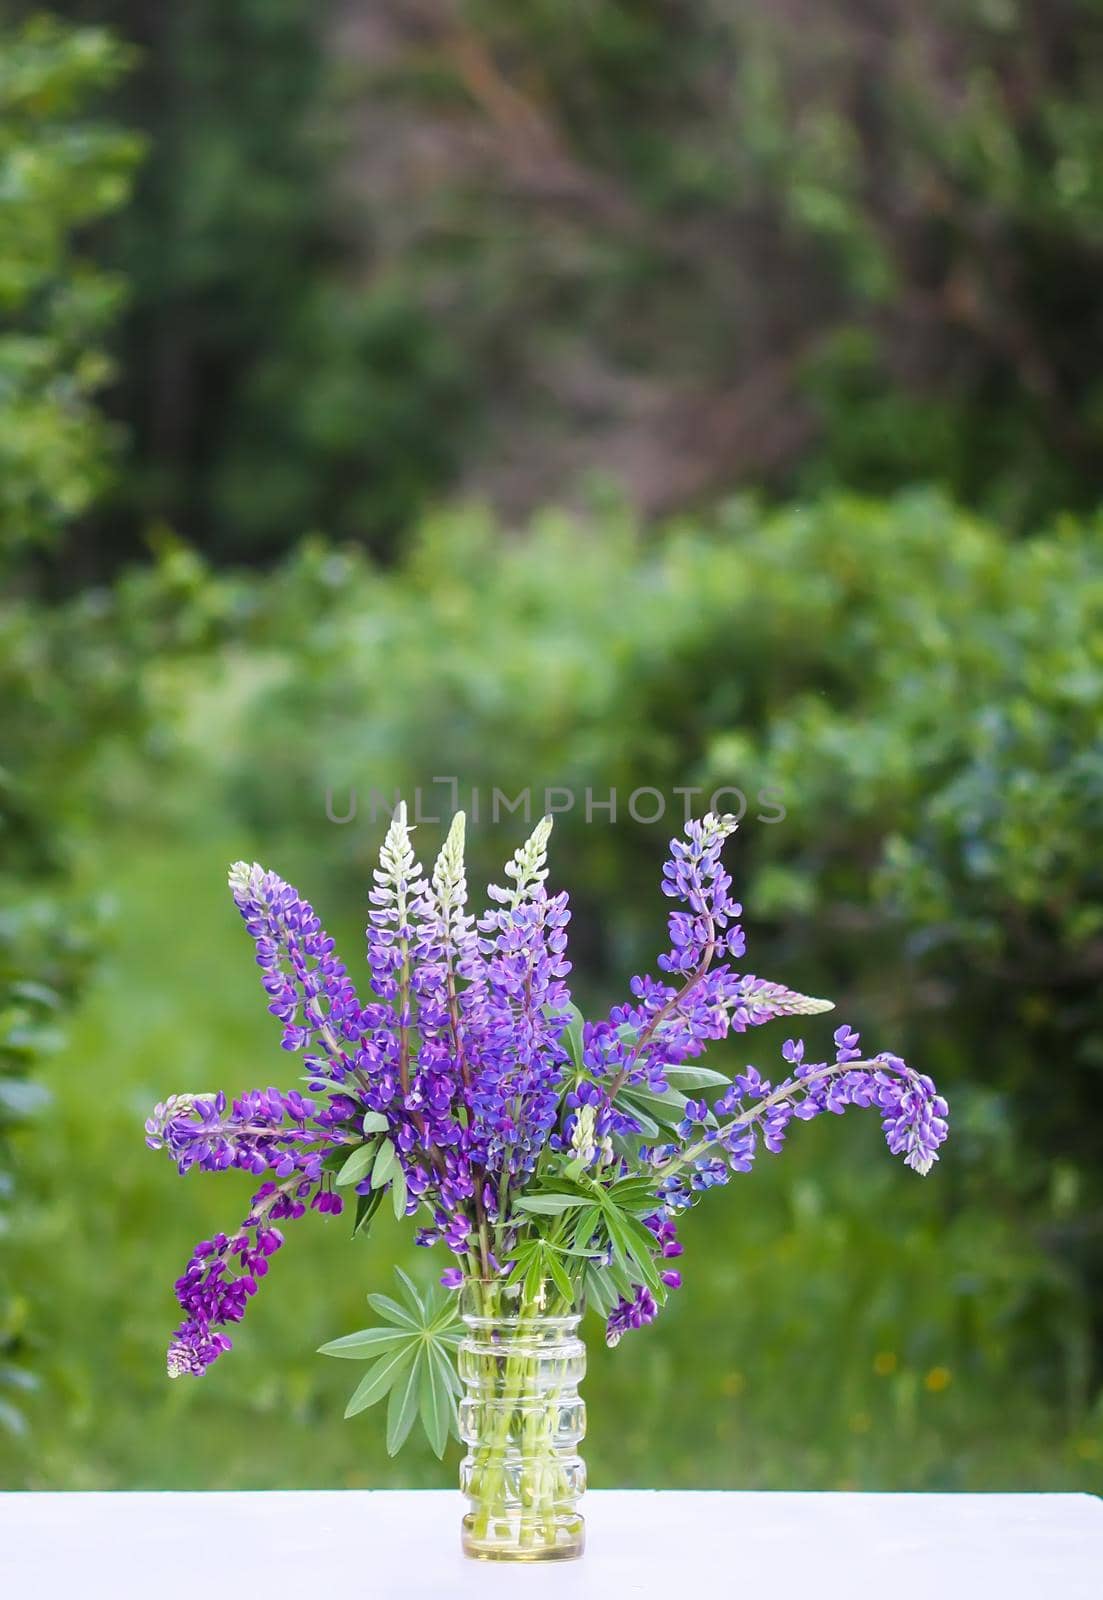 Bouquet of summer flowers outdoors. Large-leaved or Bigleaf Lupine purple flowers. Lupinus polyphyllus plants.